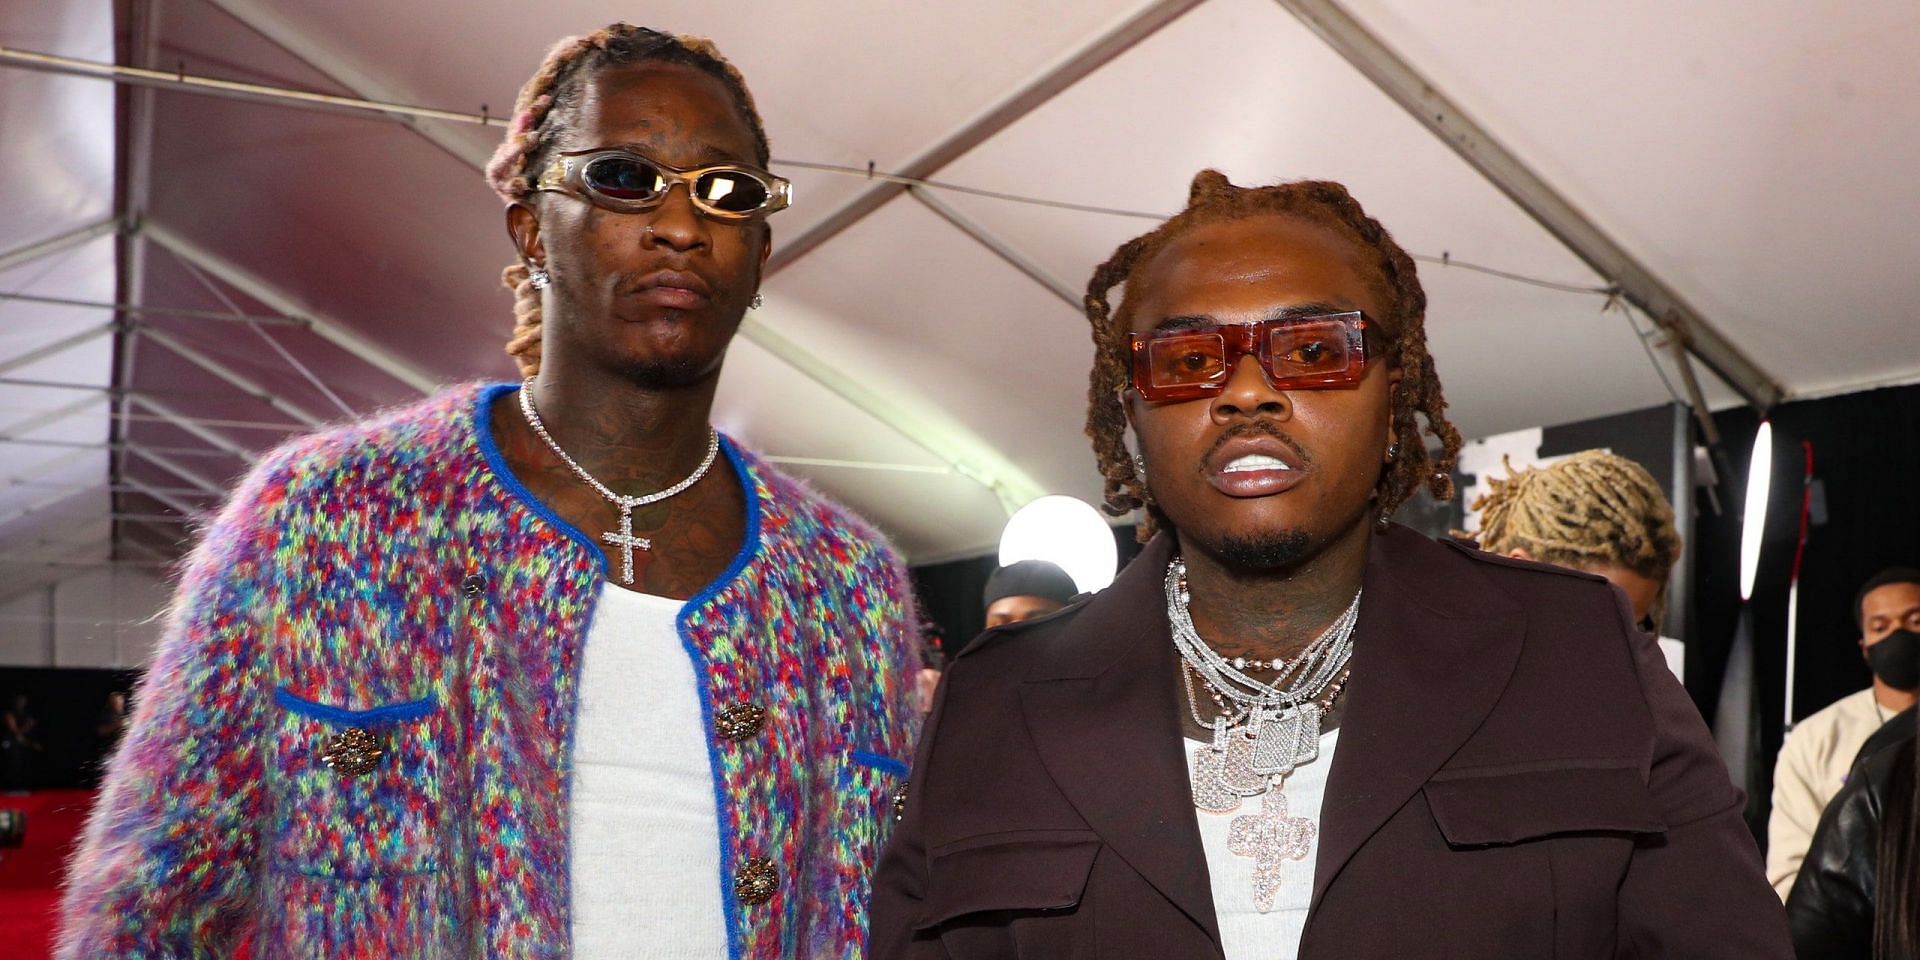 Why was Gunna released but not Young Thug? Details and netizens reactions explored. (Image via Instagram)